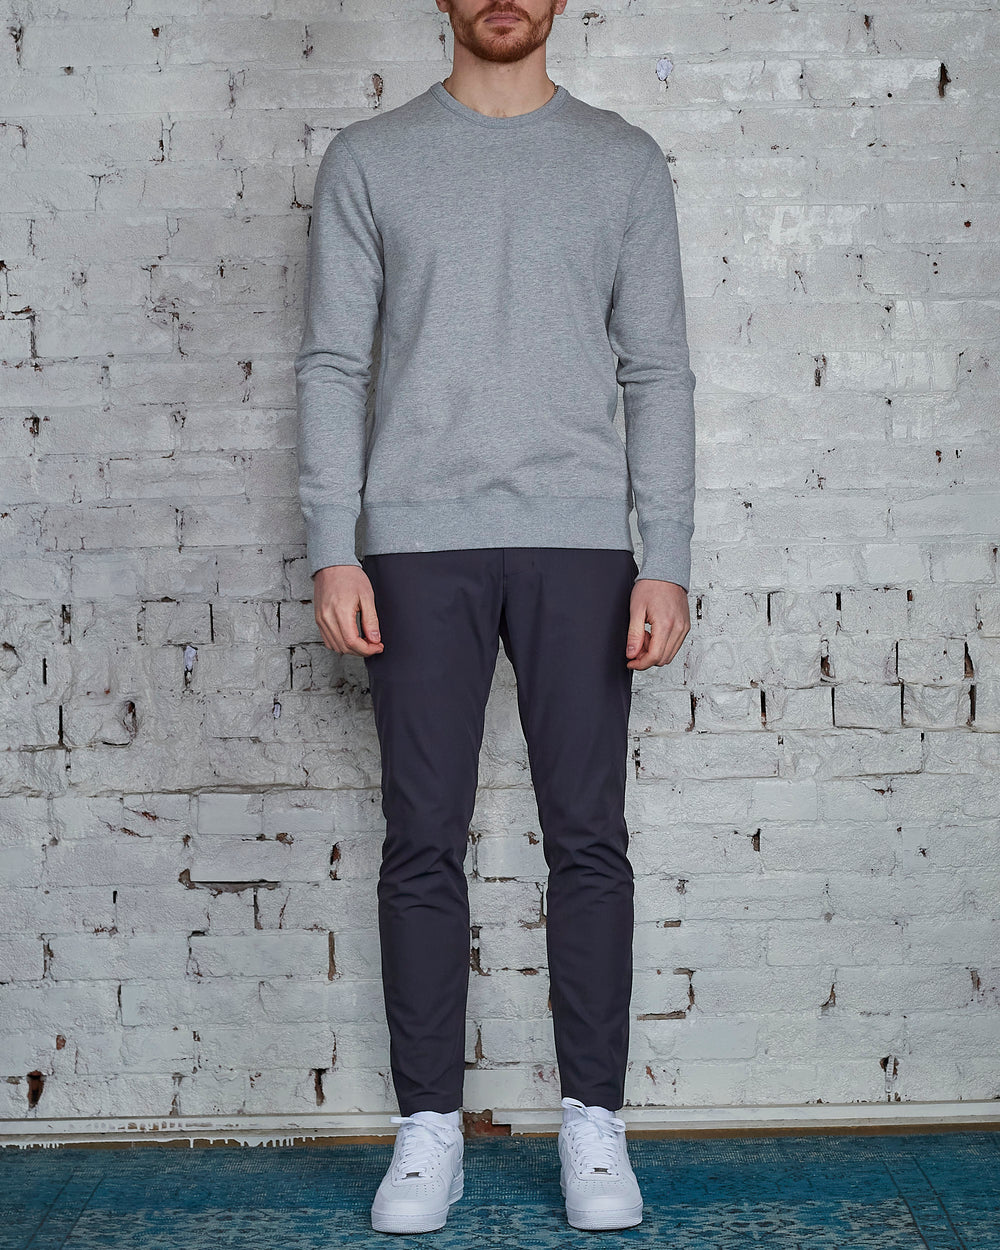 Reigning Champ Knit Merino Terry Sweatpant Charcoal – LESS 17